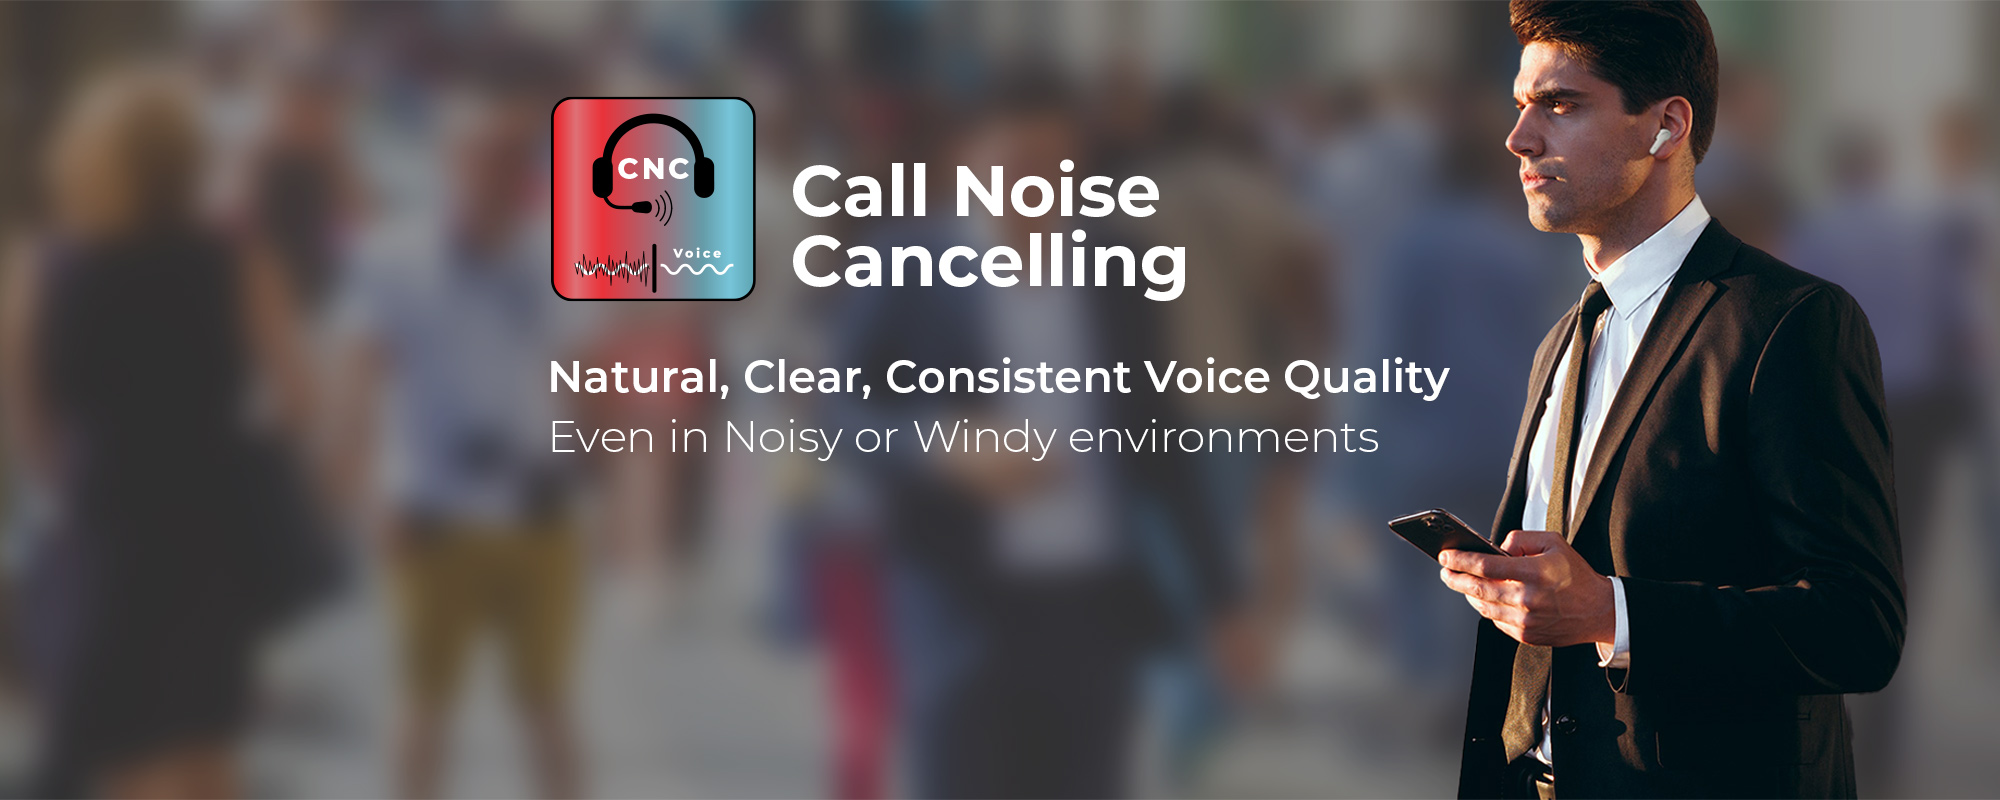 Call Noise Cancelling